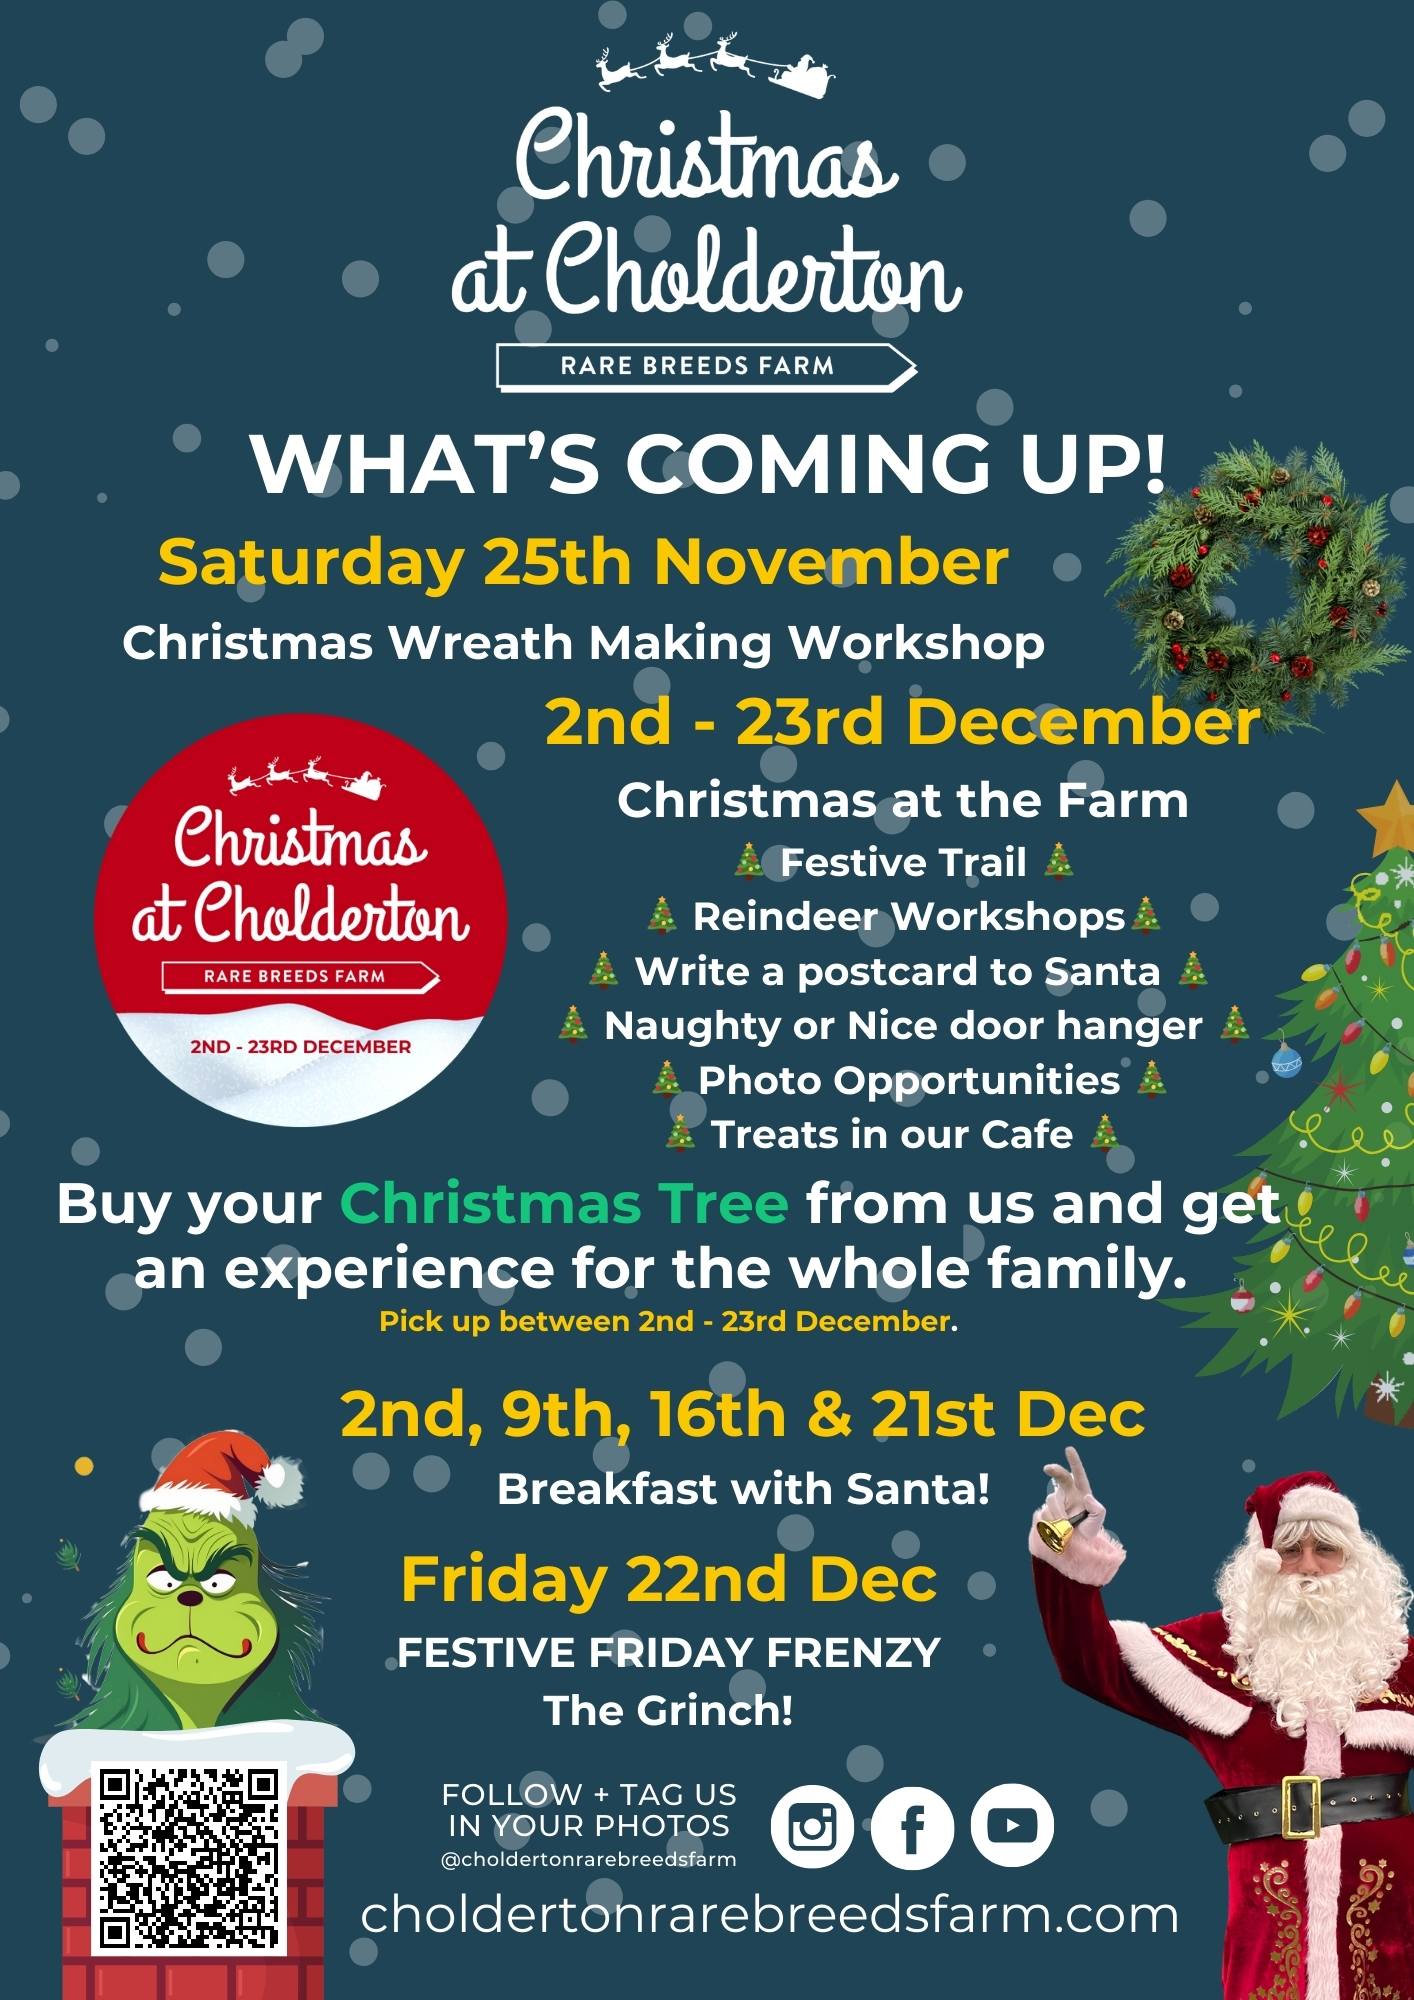 What is coming up over Christmas at Cholderton Rare Breeds Farm